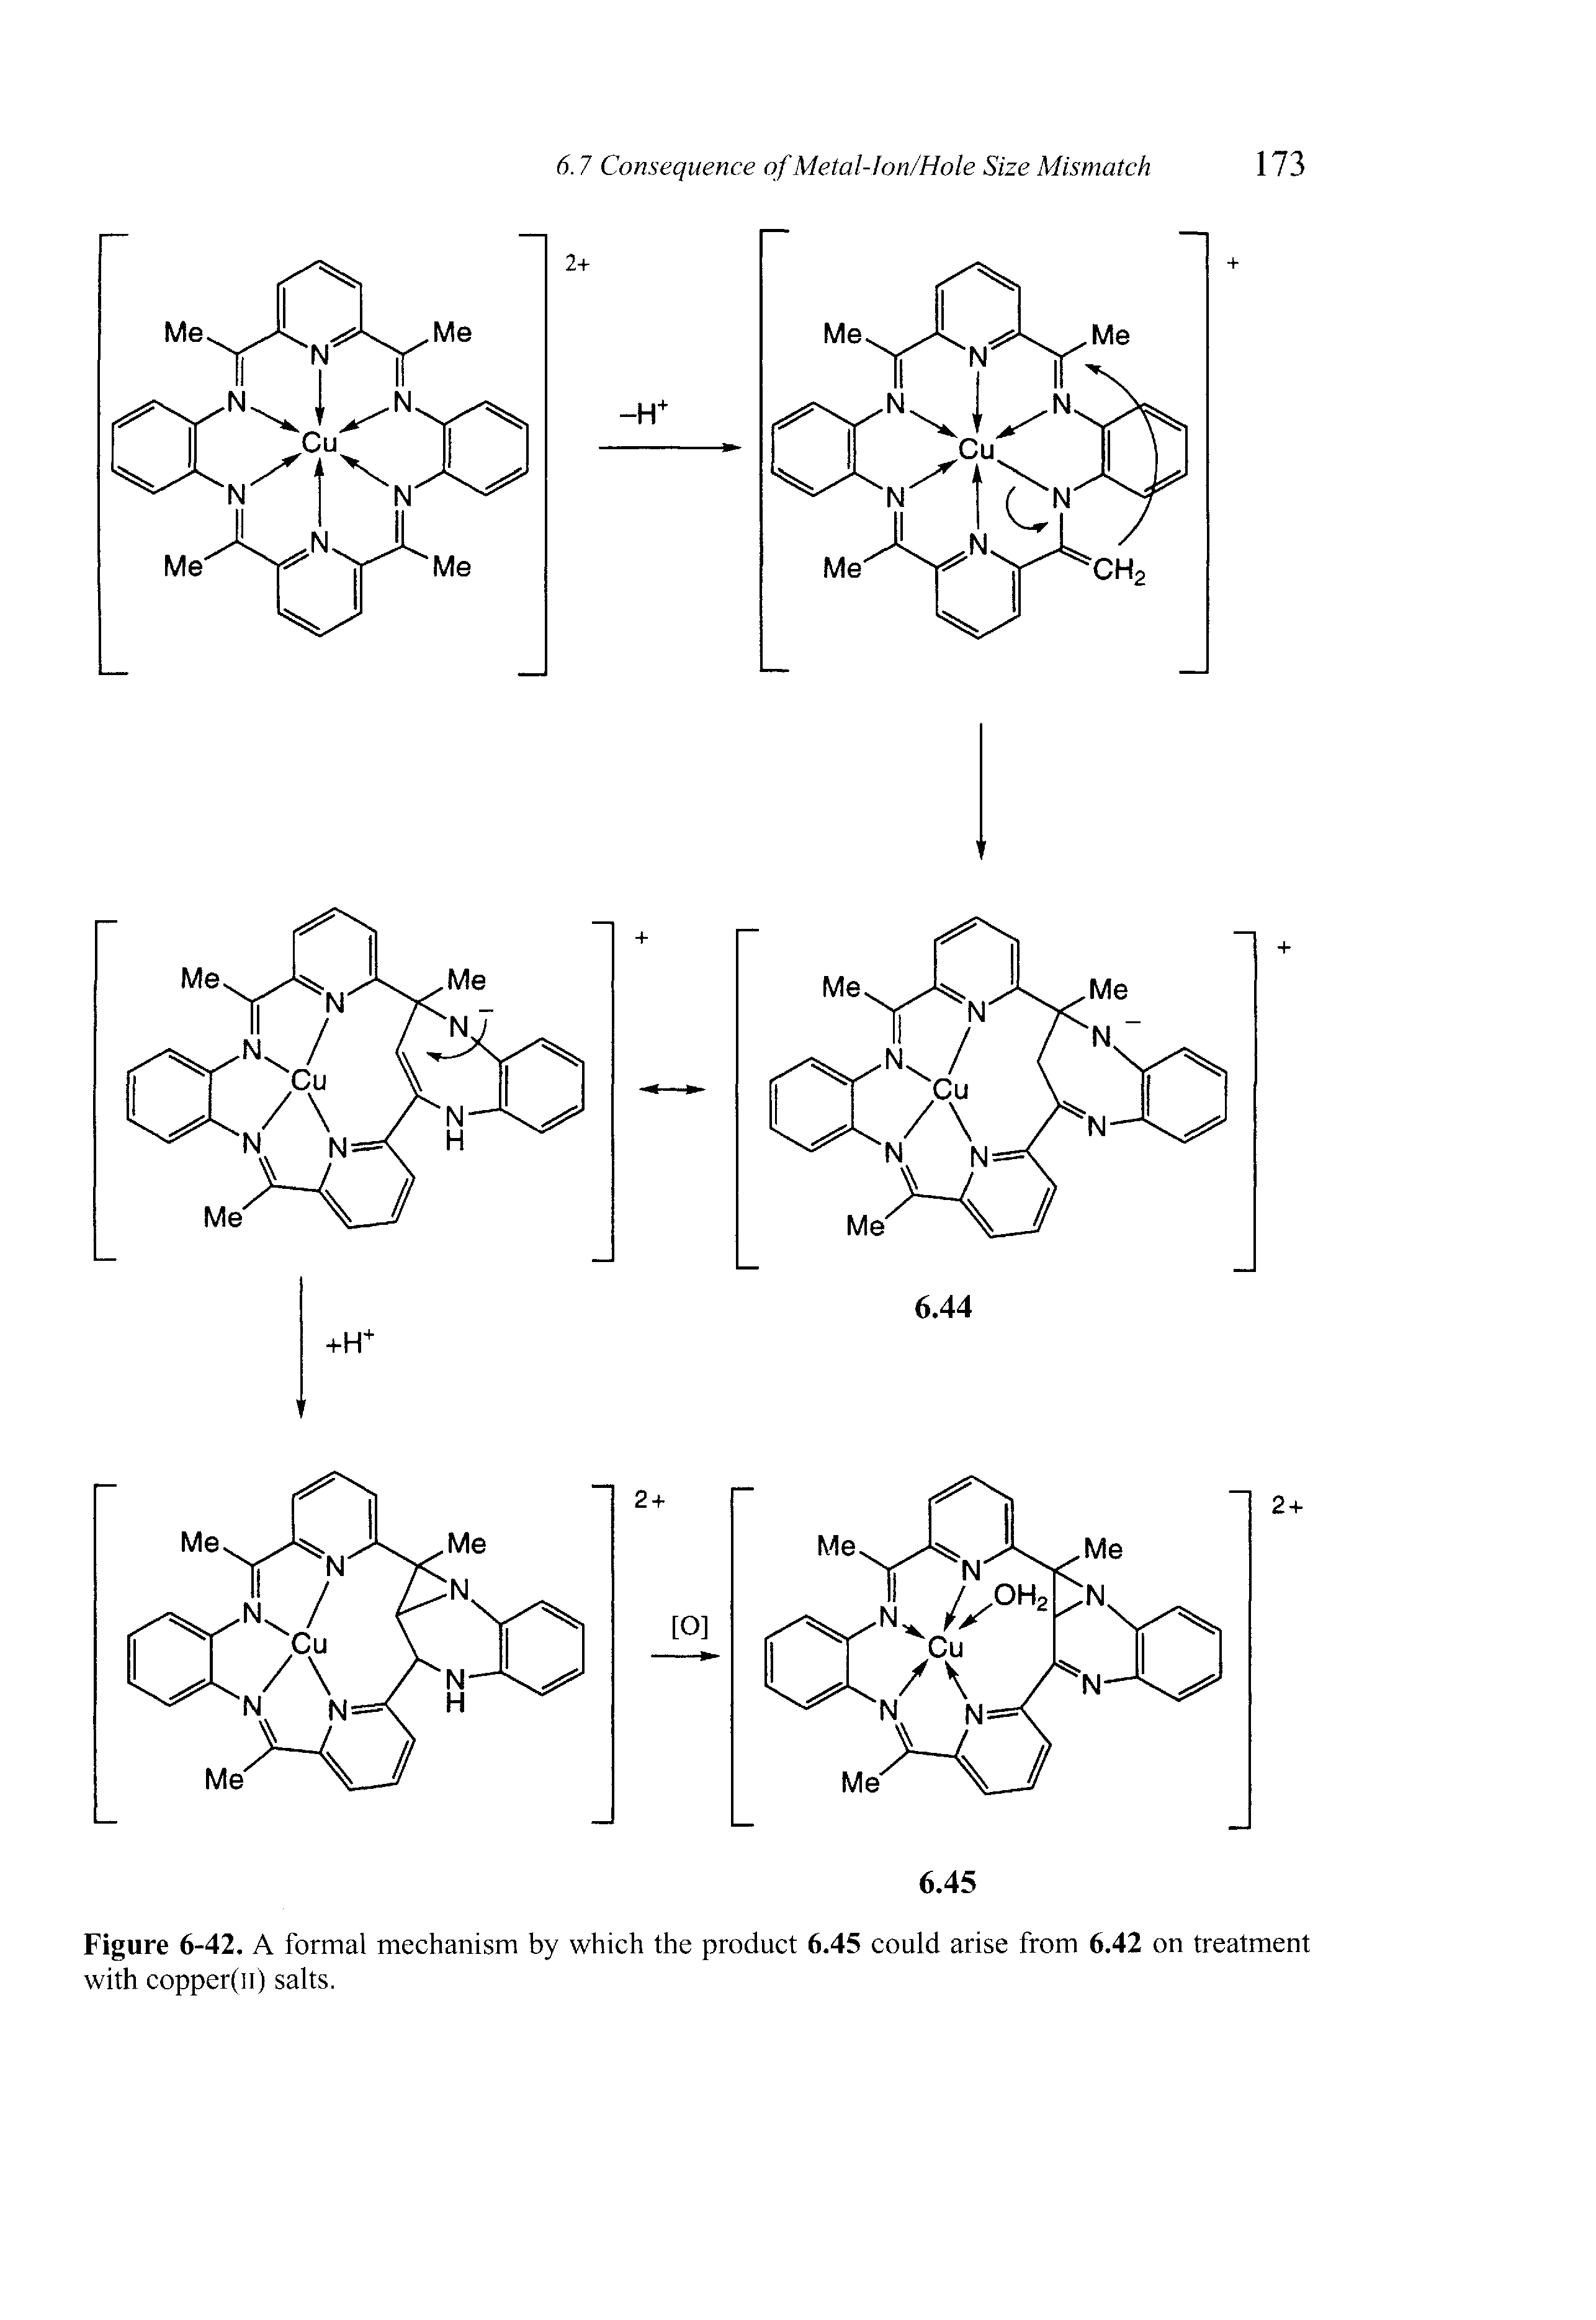 Figure 6-42. A formal mechanism by which the product 6.45 could arise from 6.42 on treatment with copper(n) salts.